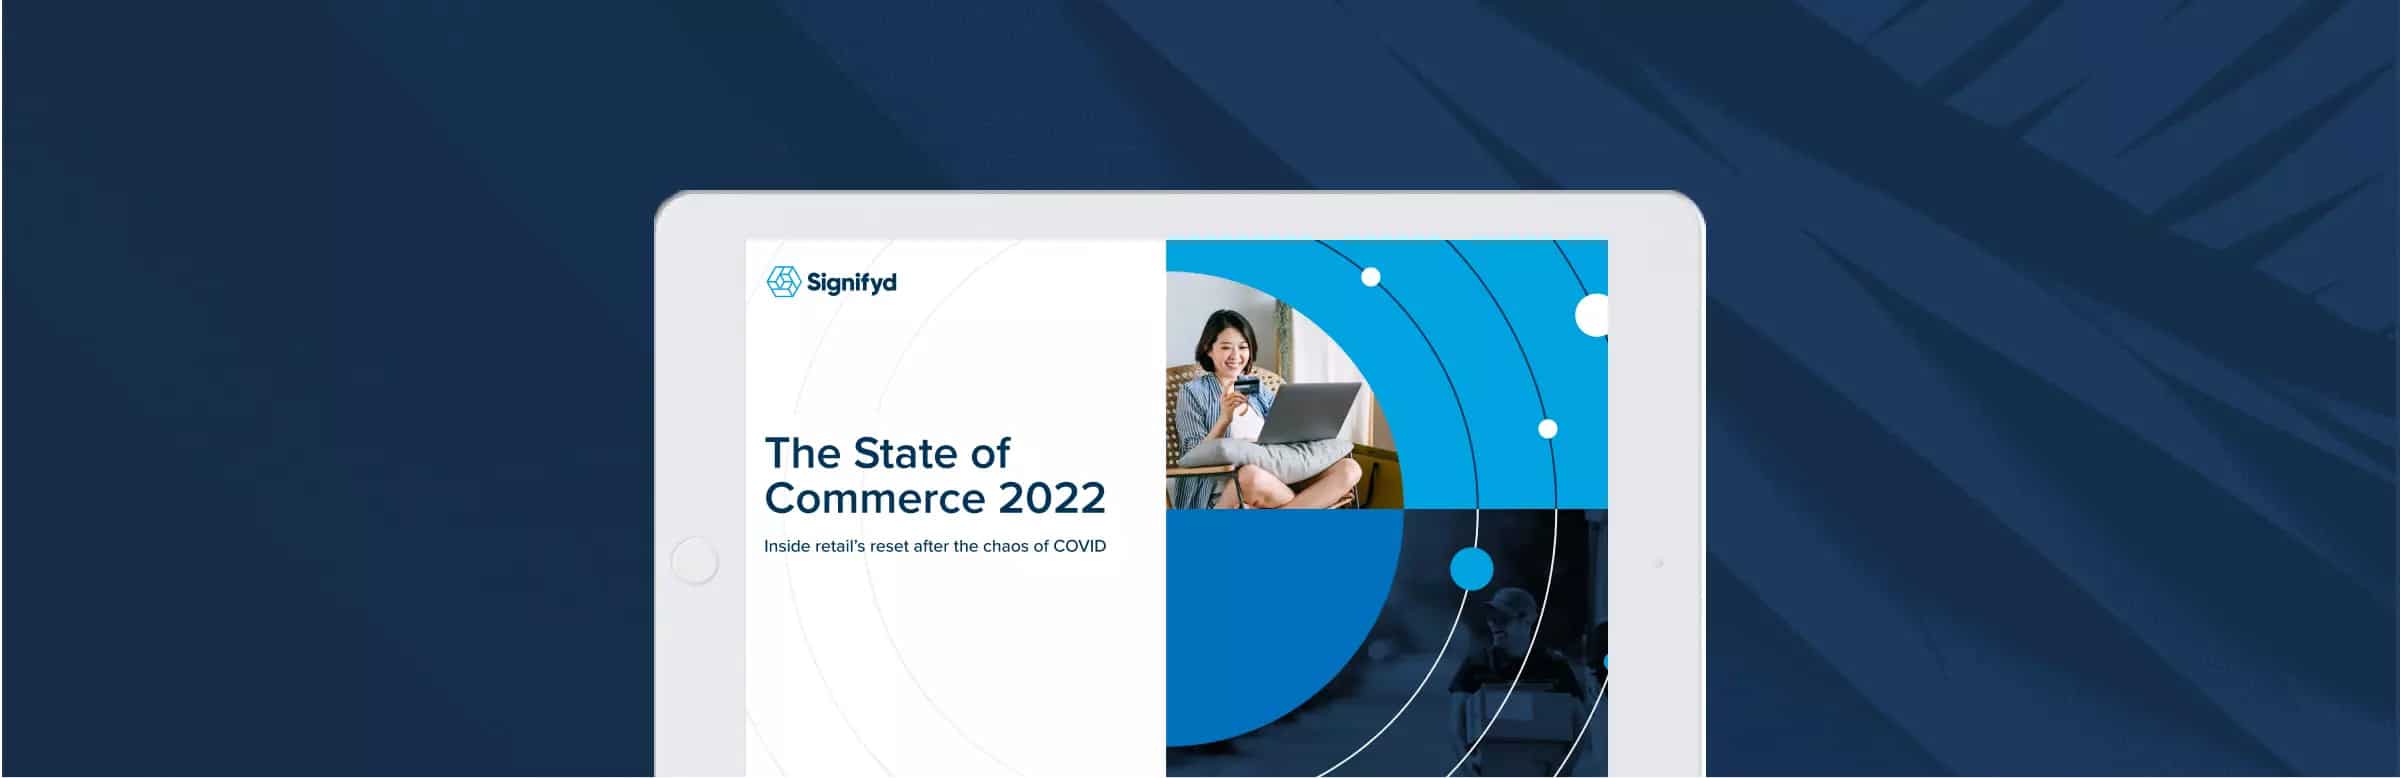 State of Commerce 2022 | Signifyd